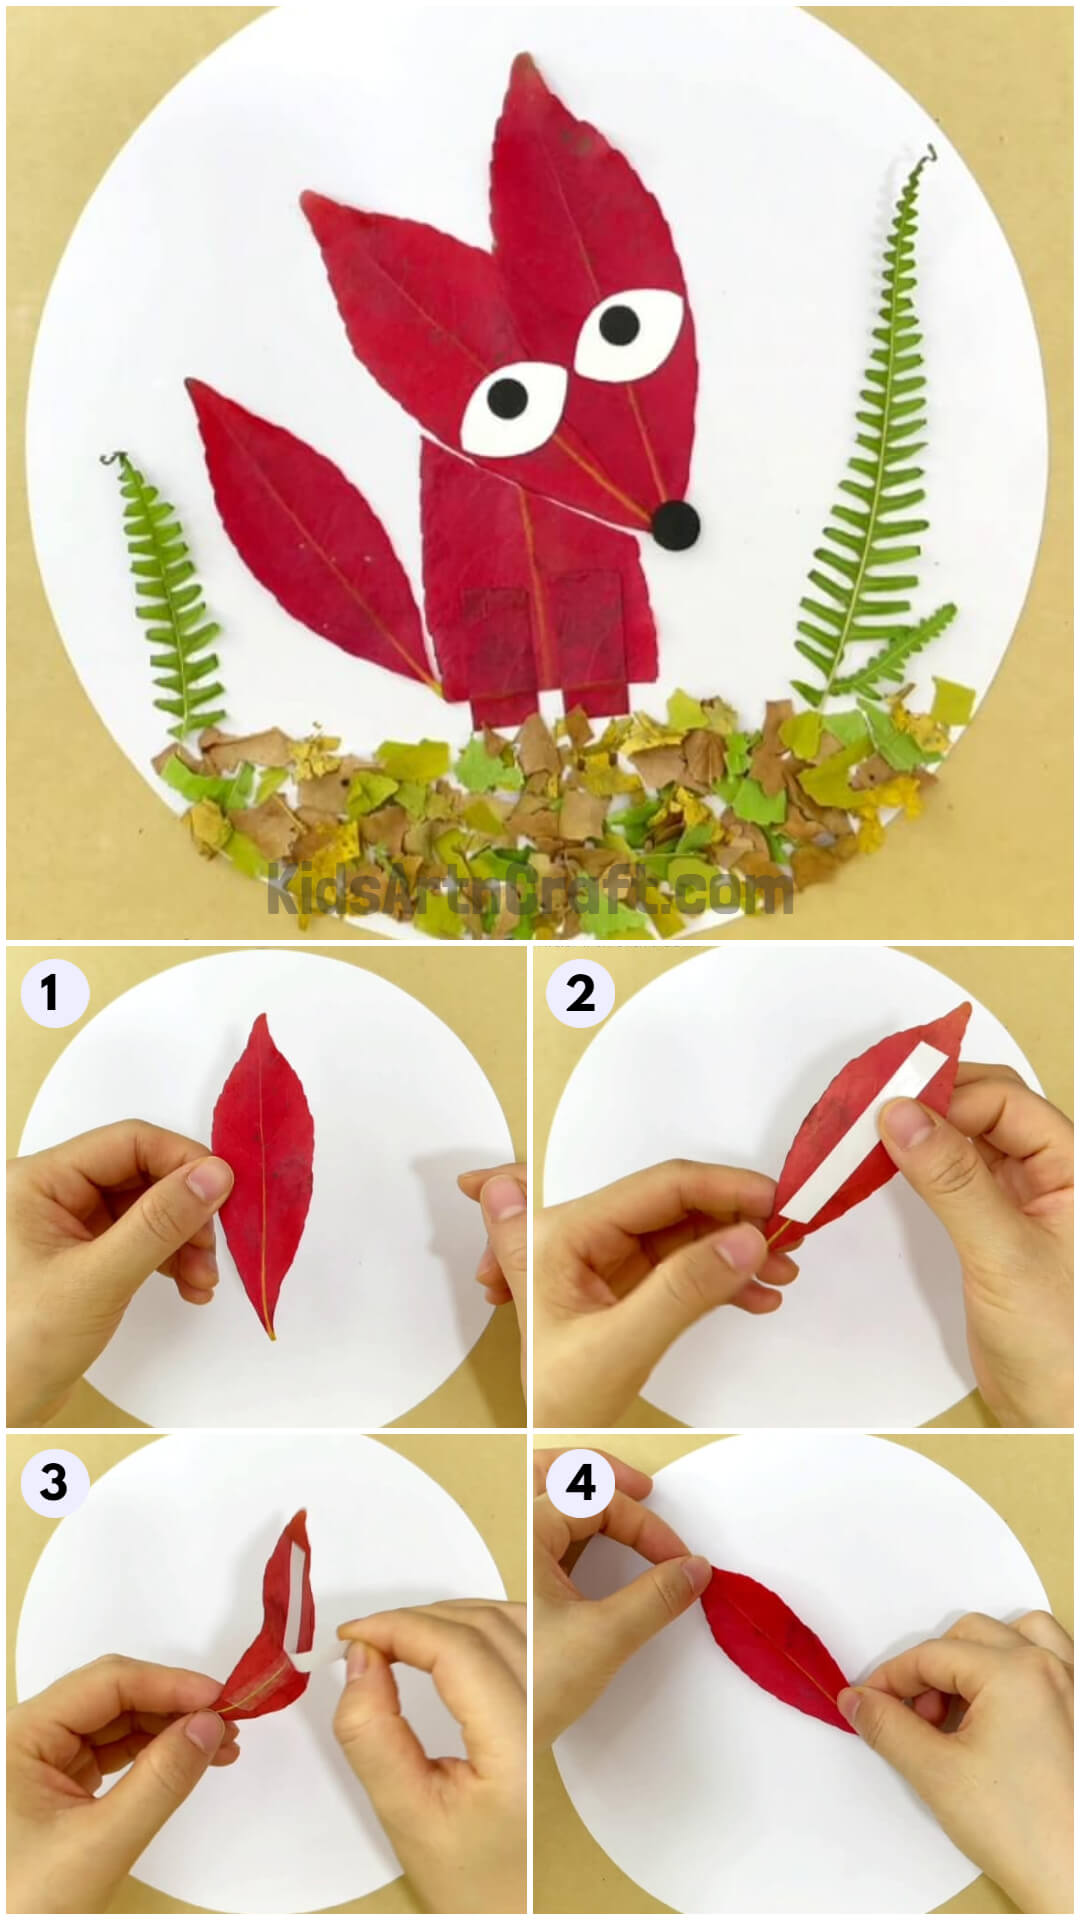 Learn to Make Fox Art And Craft Using Fall Leaves